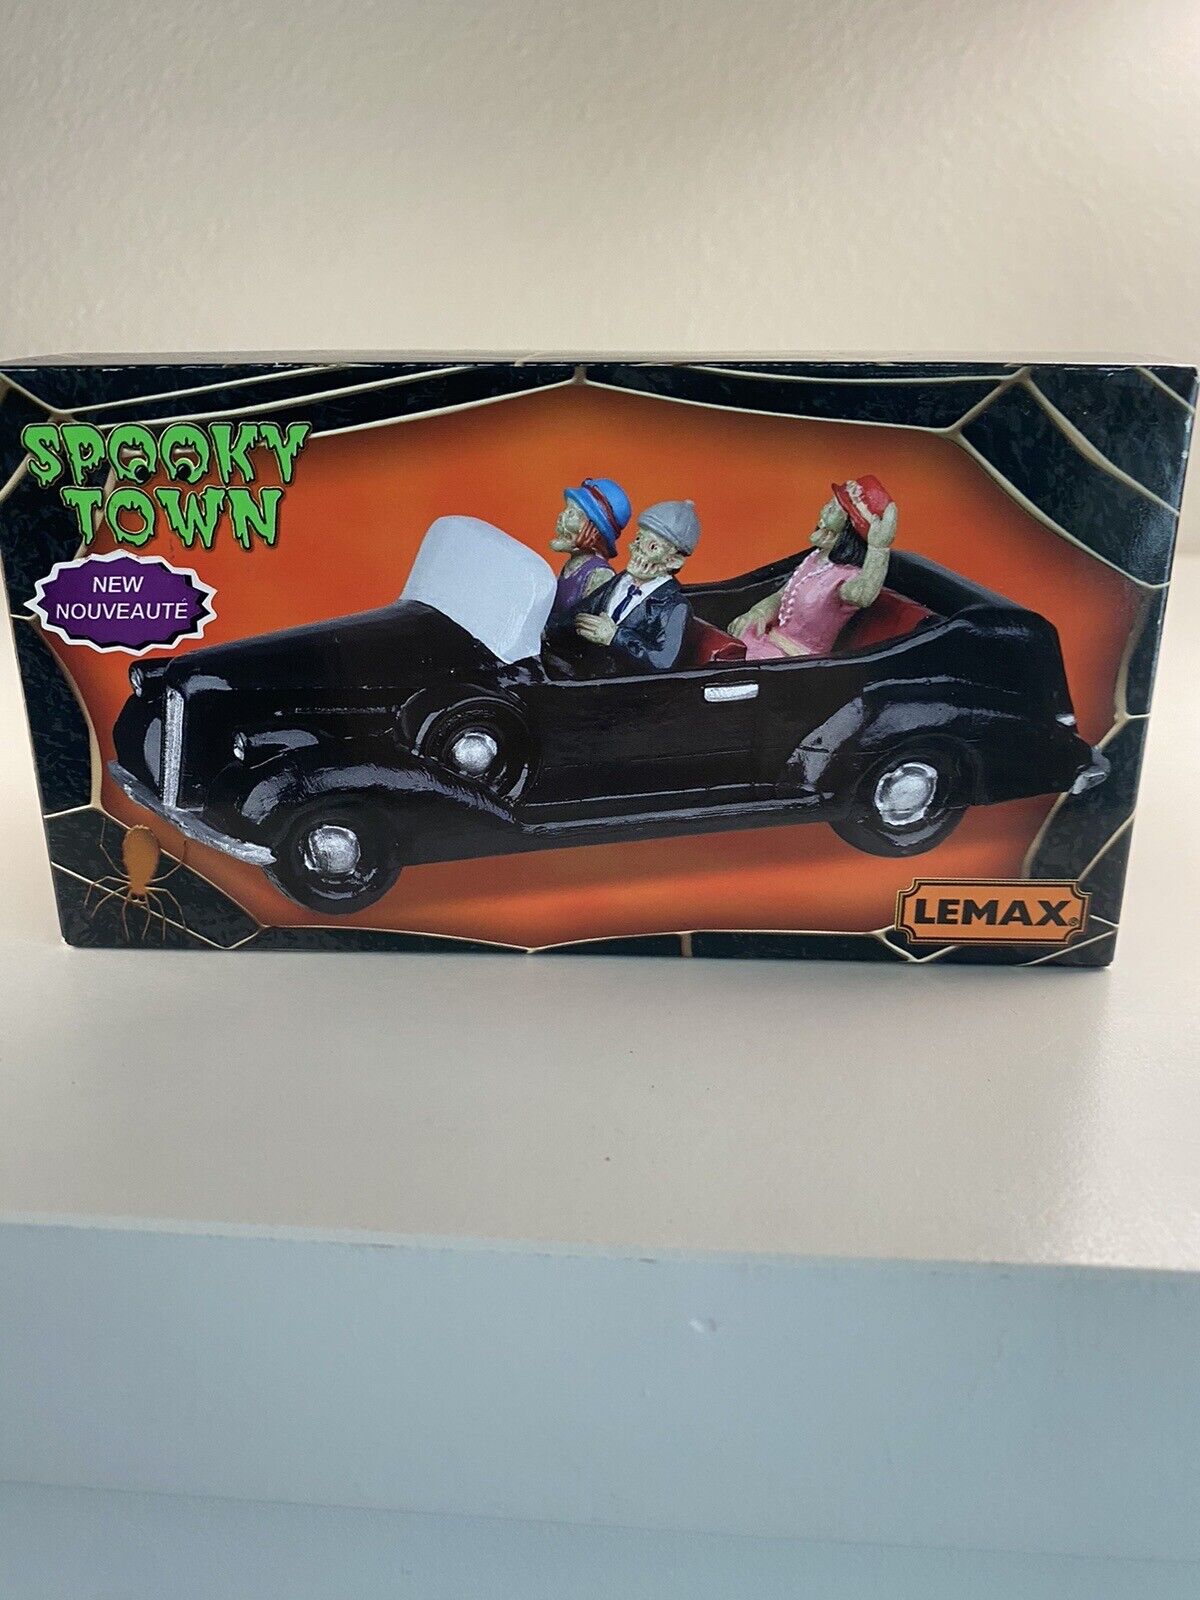 Lemax Spooky Town Roaring Roadster #23603  New